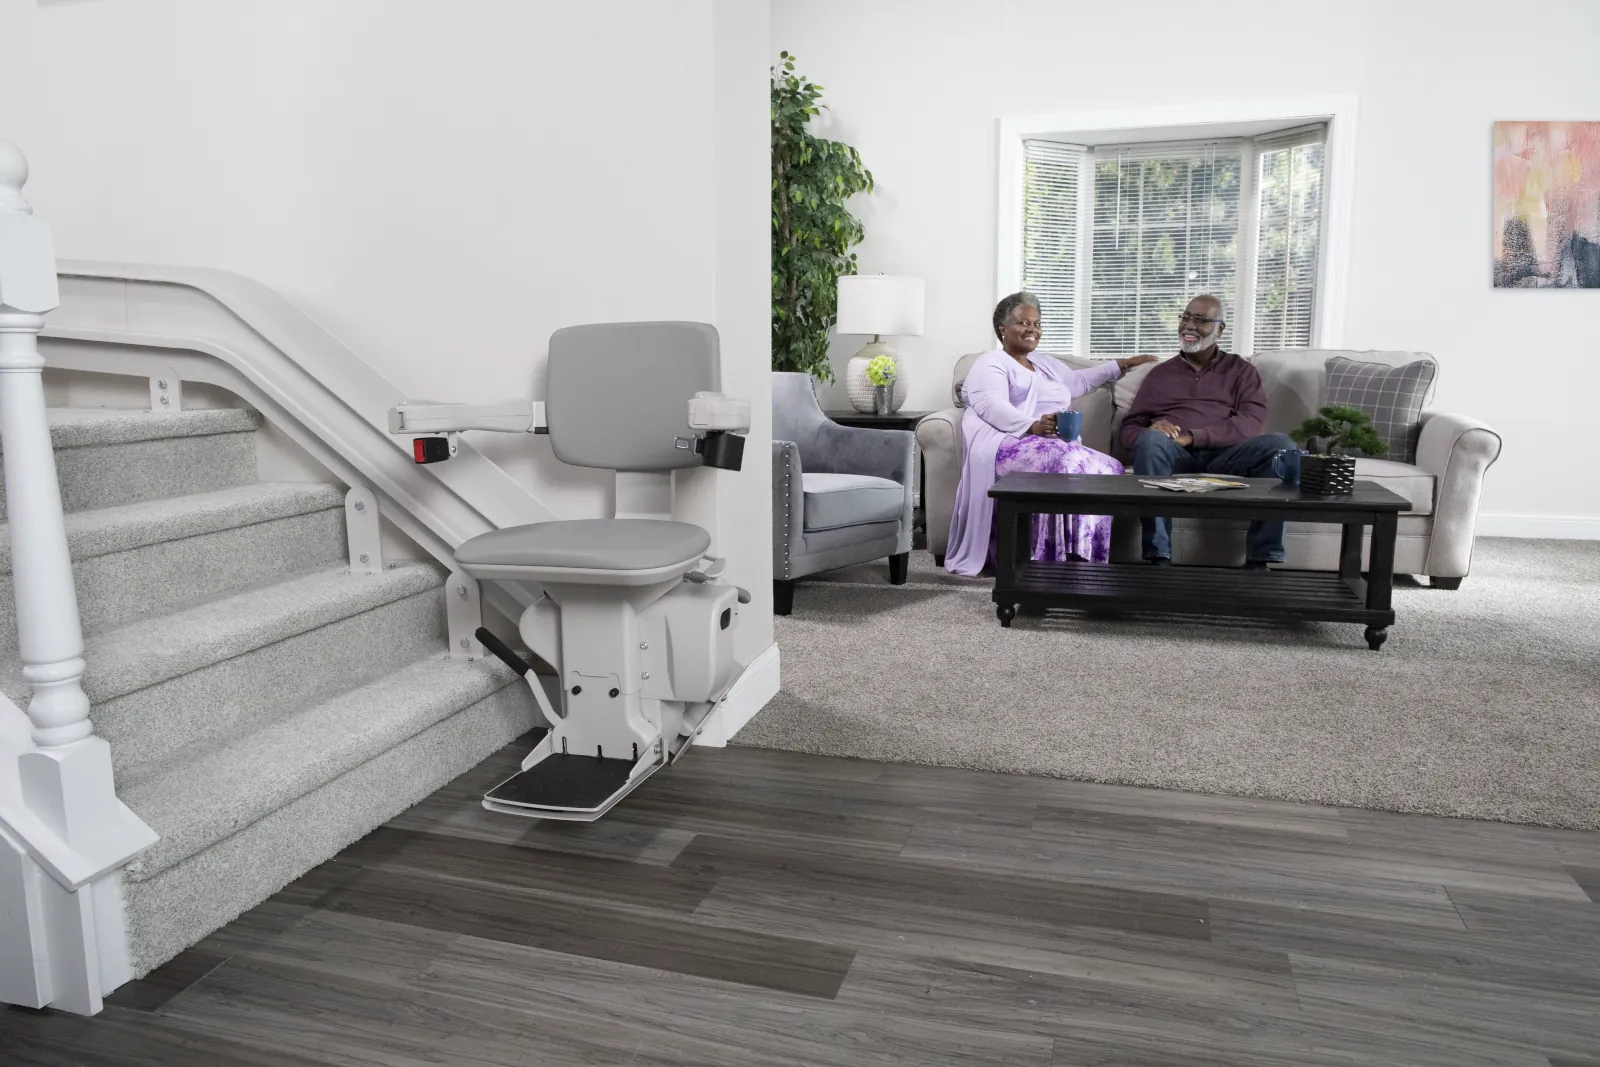 Stairlifts Offered by Mobility123: Types, Brands, and Benefits